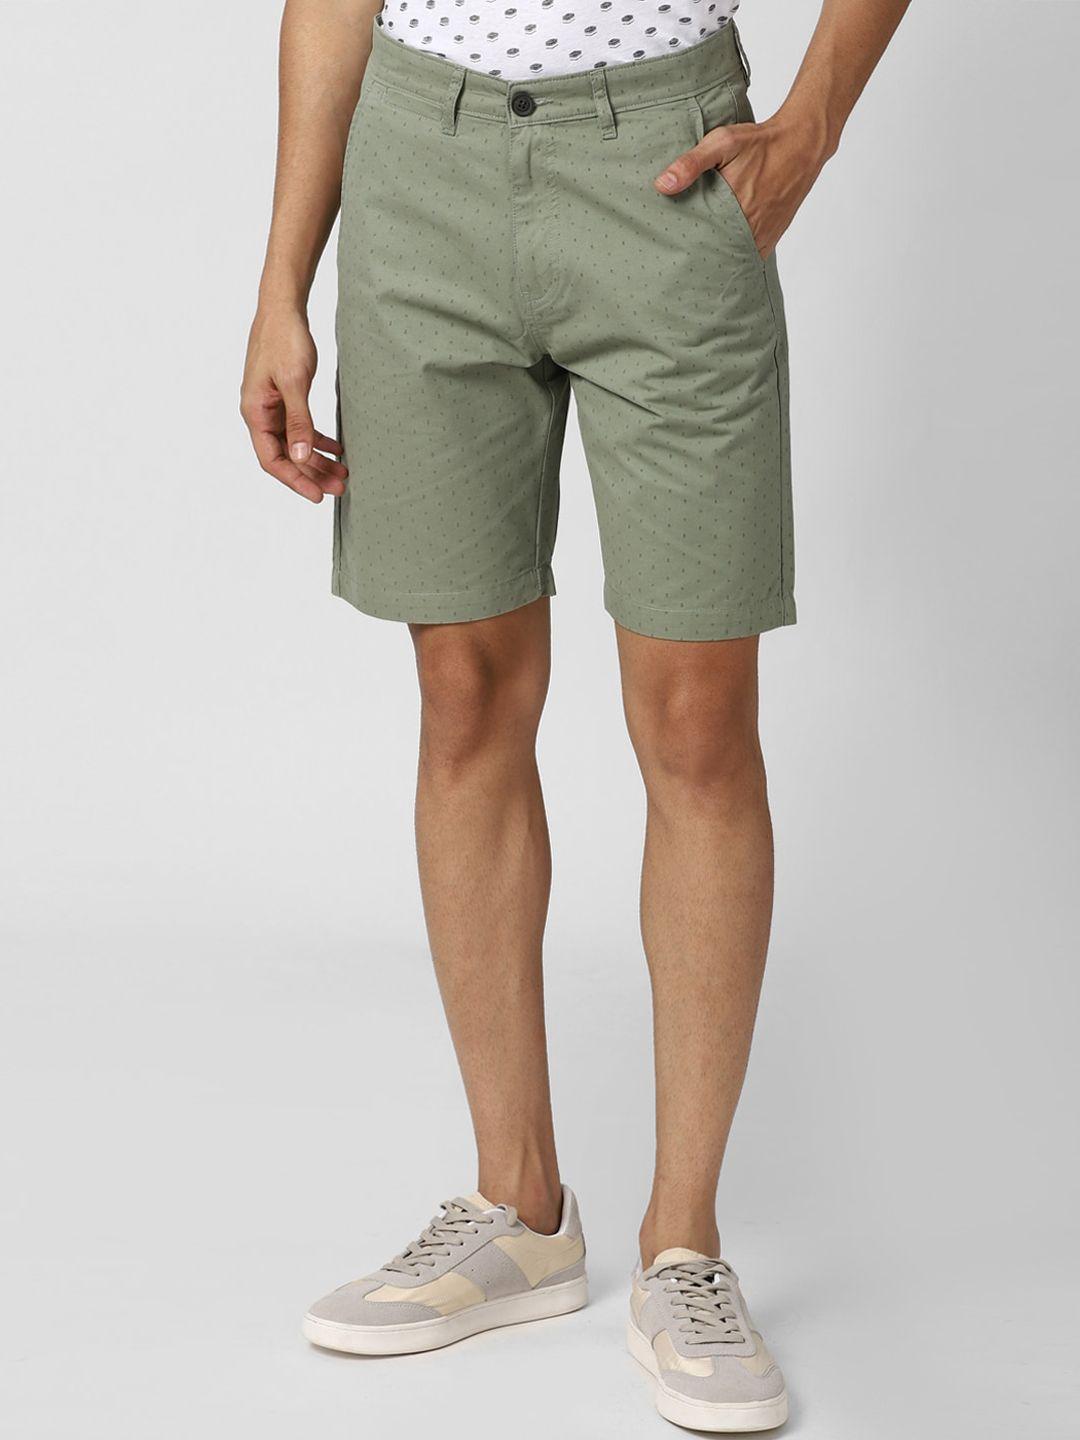 peter england casuals men olive green printed shorts